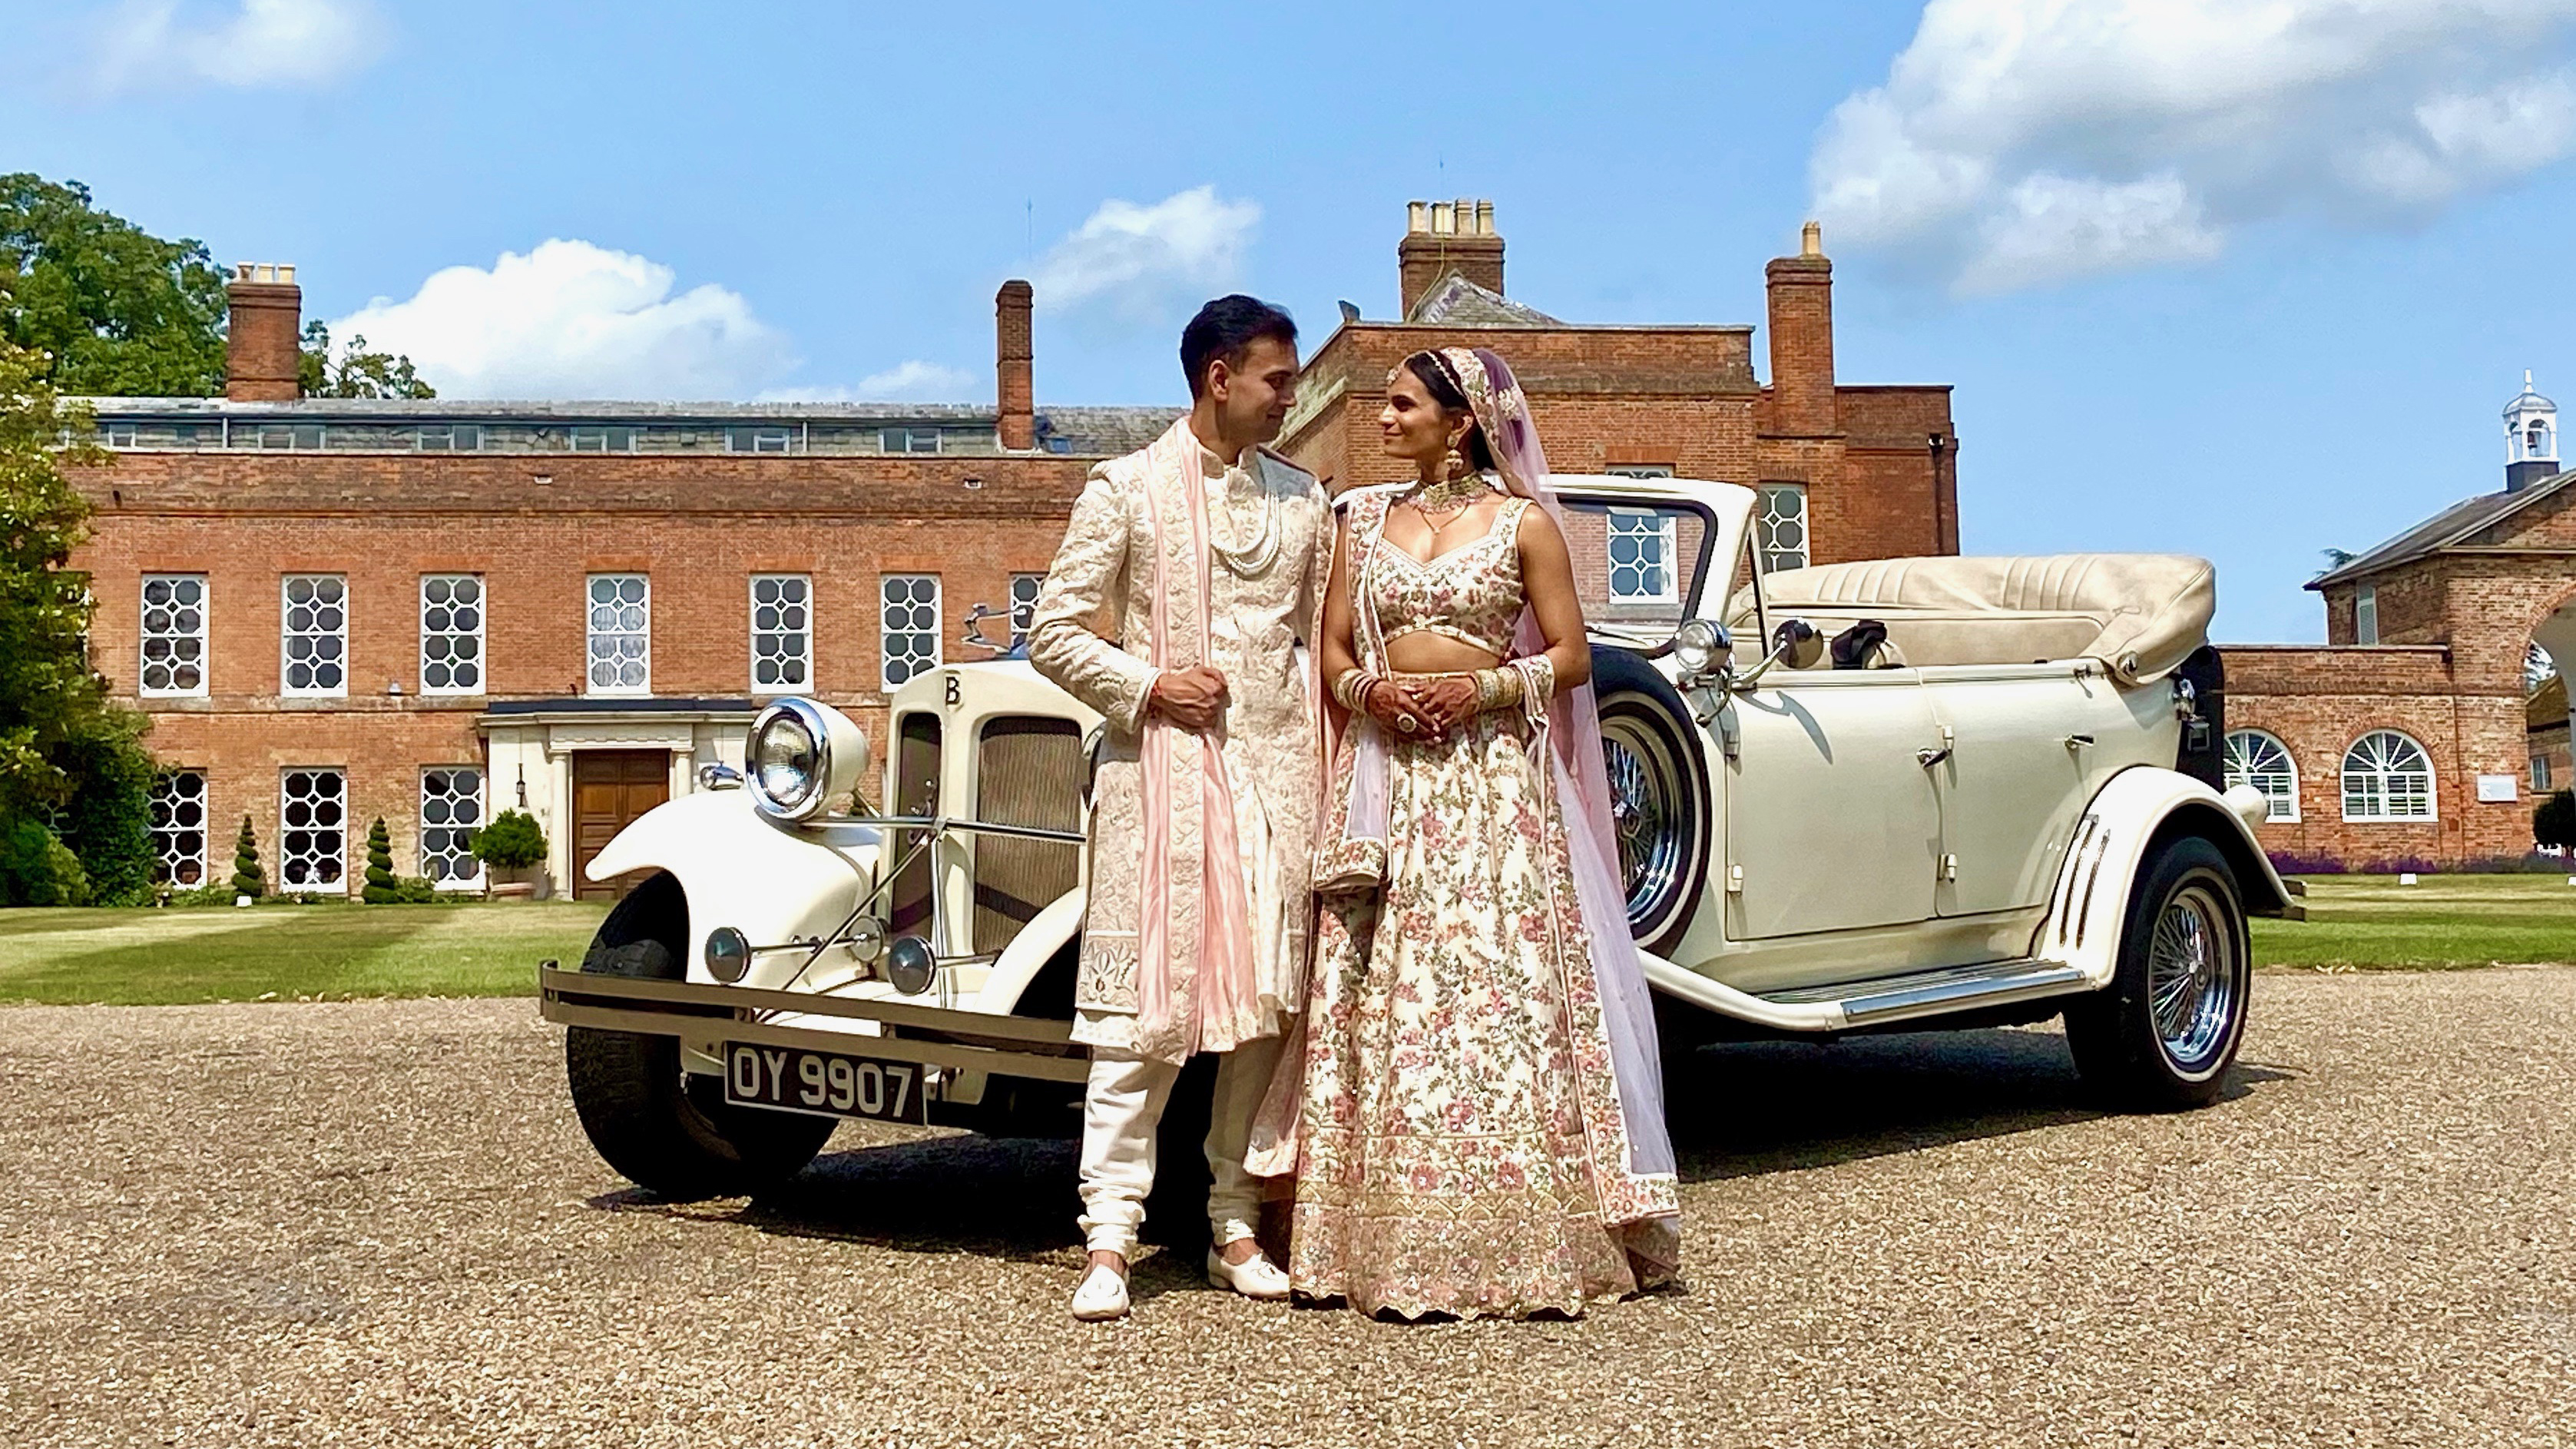 Convertible vintage style Beauford with roof down with newly wed Asian couple standing in front of the vehicle looking at each others. Vehicle is parked in front of a large manor house in Ilford